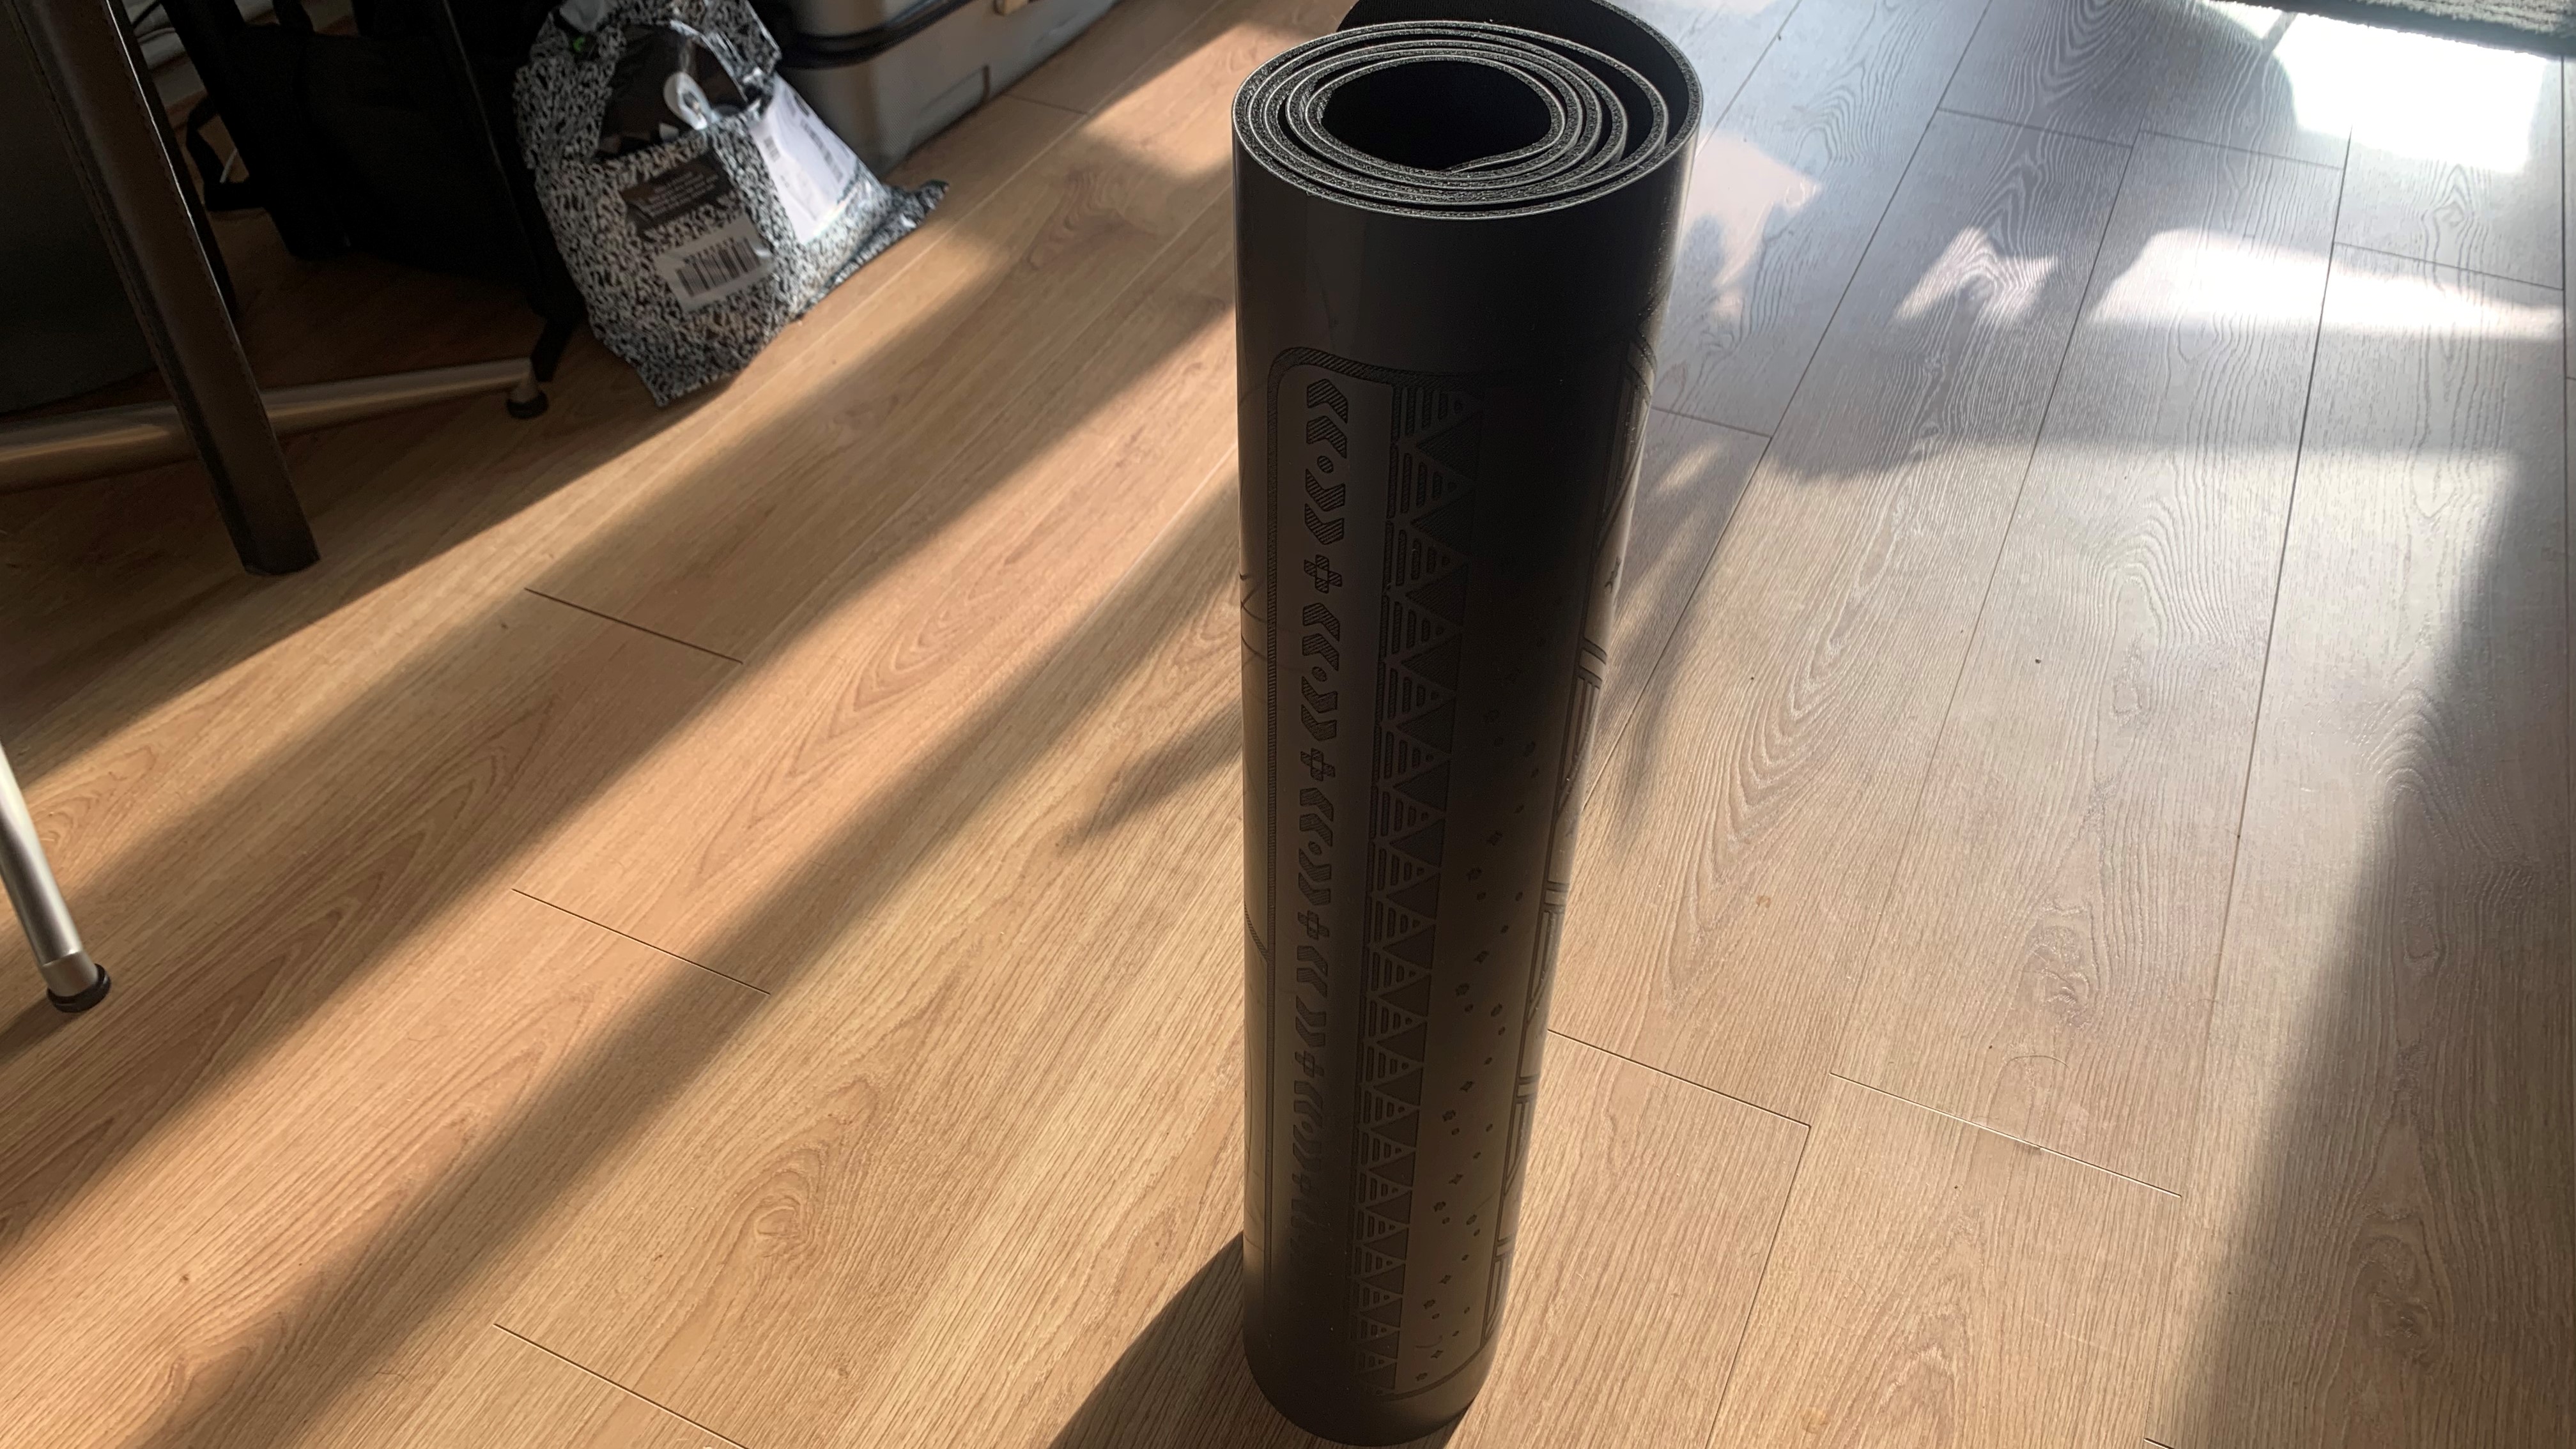 Naked Yogi mat rolled up, being tested by Live Science